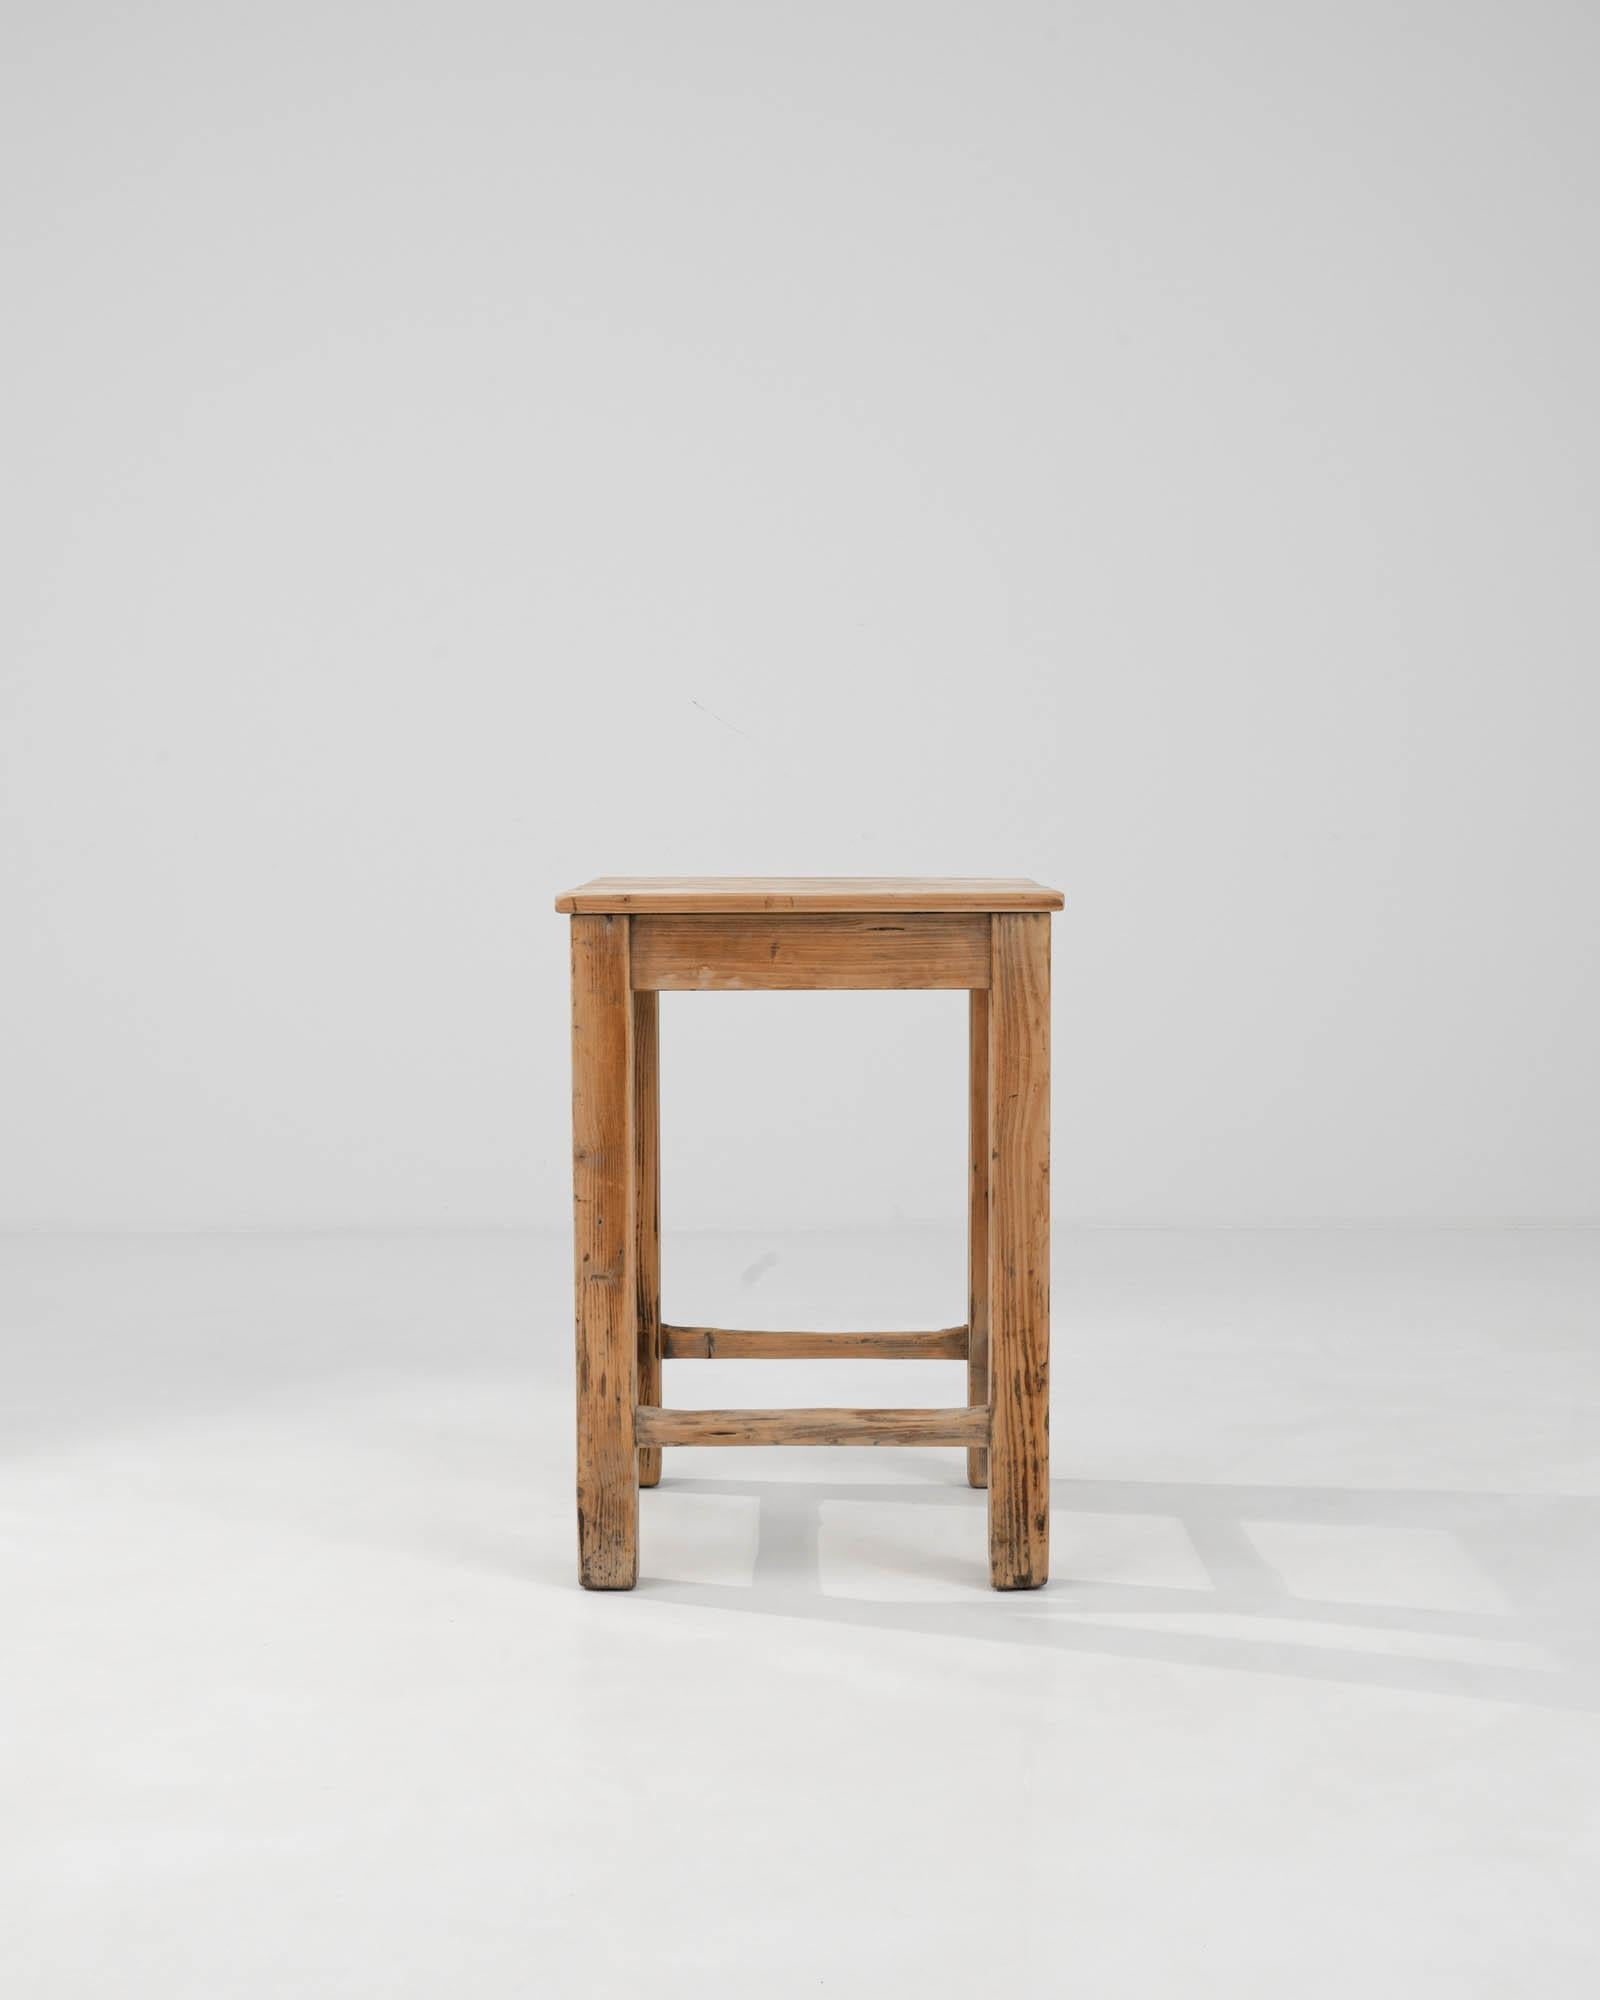 This 1900s Central European Wooden Side Table embodies the unassuming elegance of early 20th-century craftsmanship. Constructed from sturdy, well-aged wood, it boasts a natural finish that highlights the grain and character of the timber. The